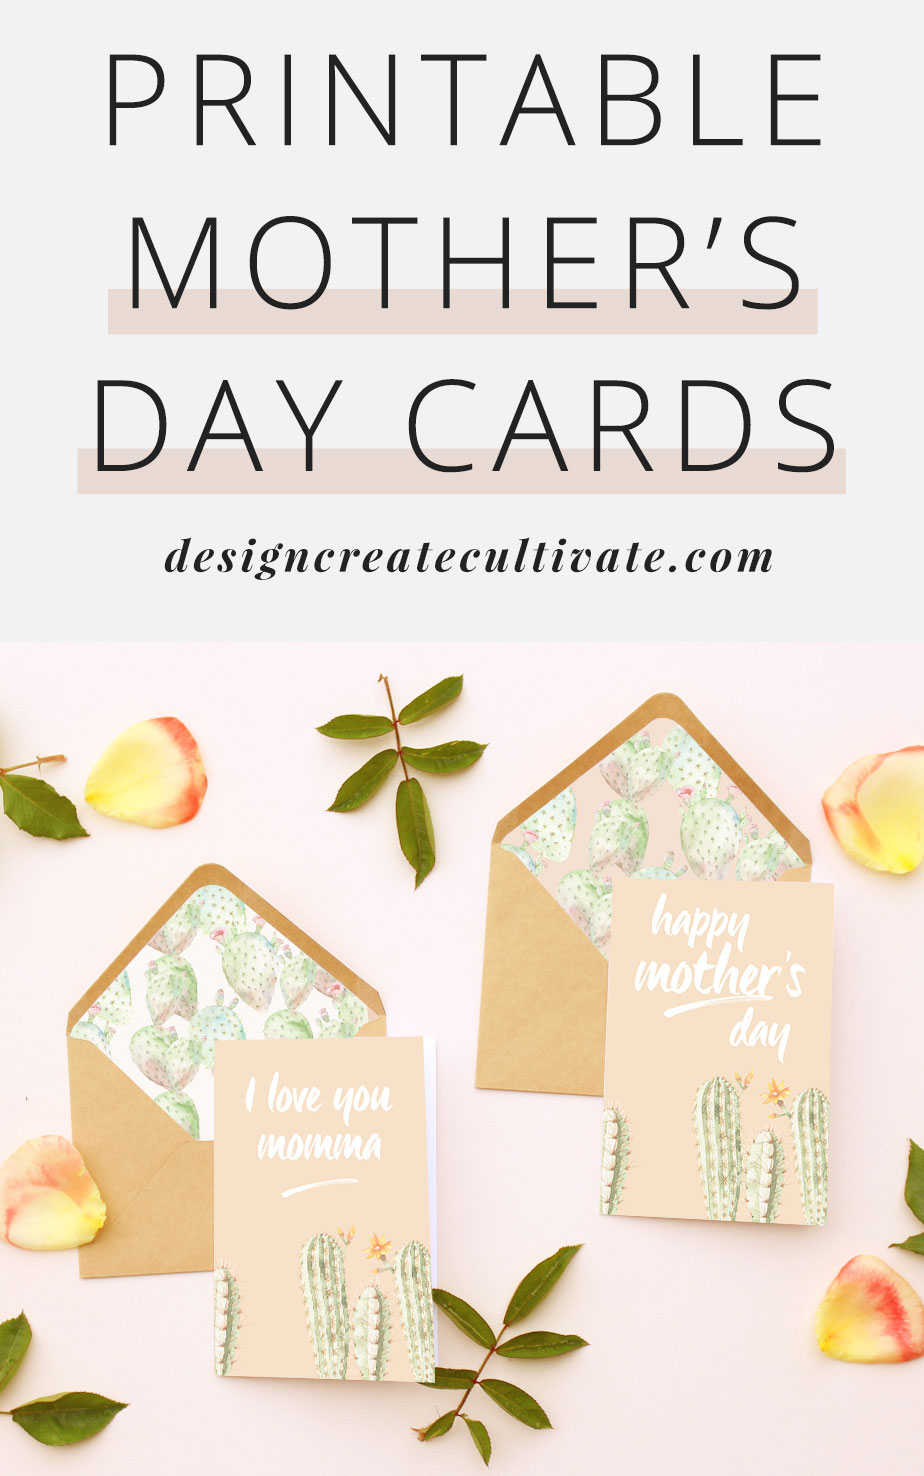 Free Printable Mother's Day Cards - Design. Create. Cultivate.